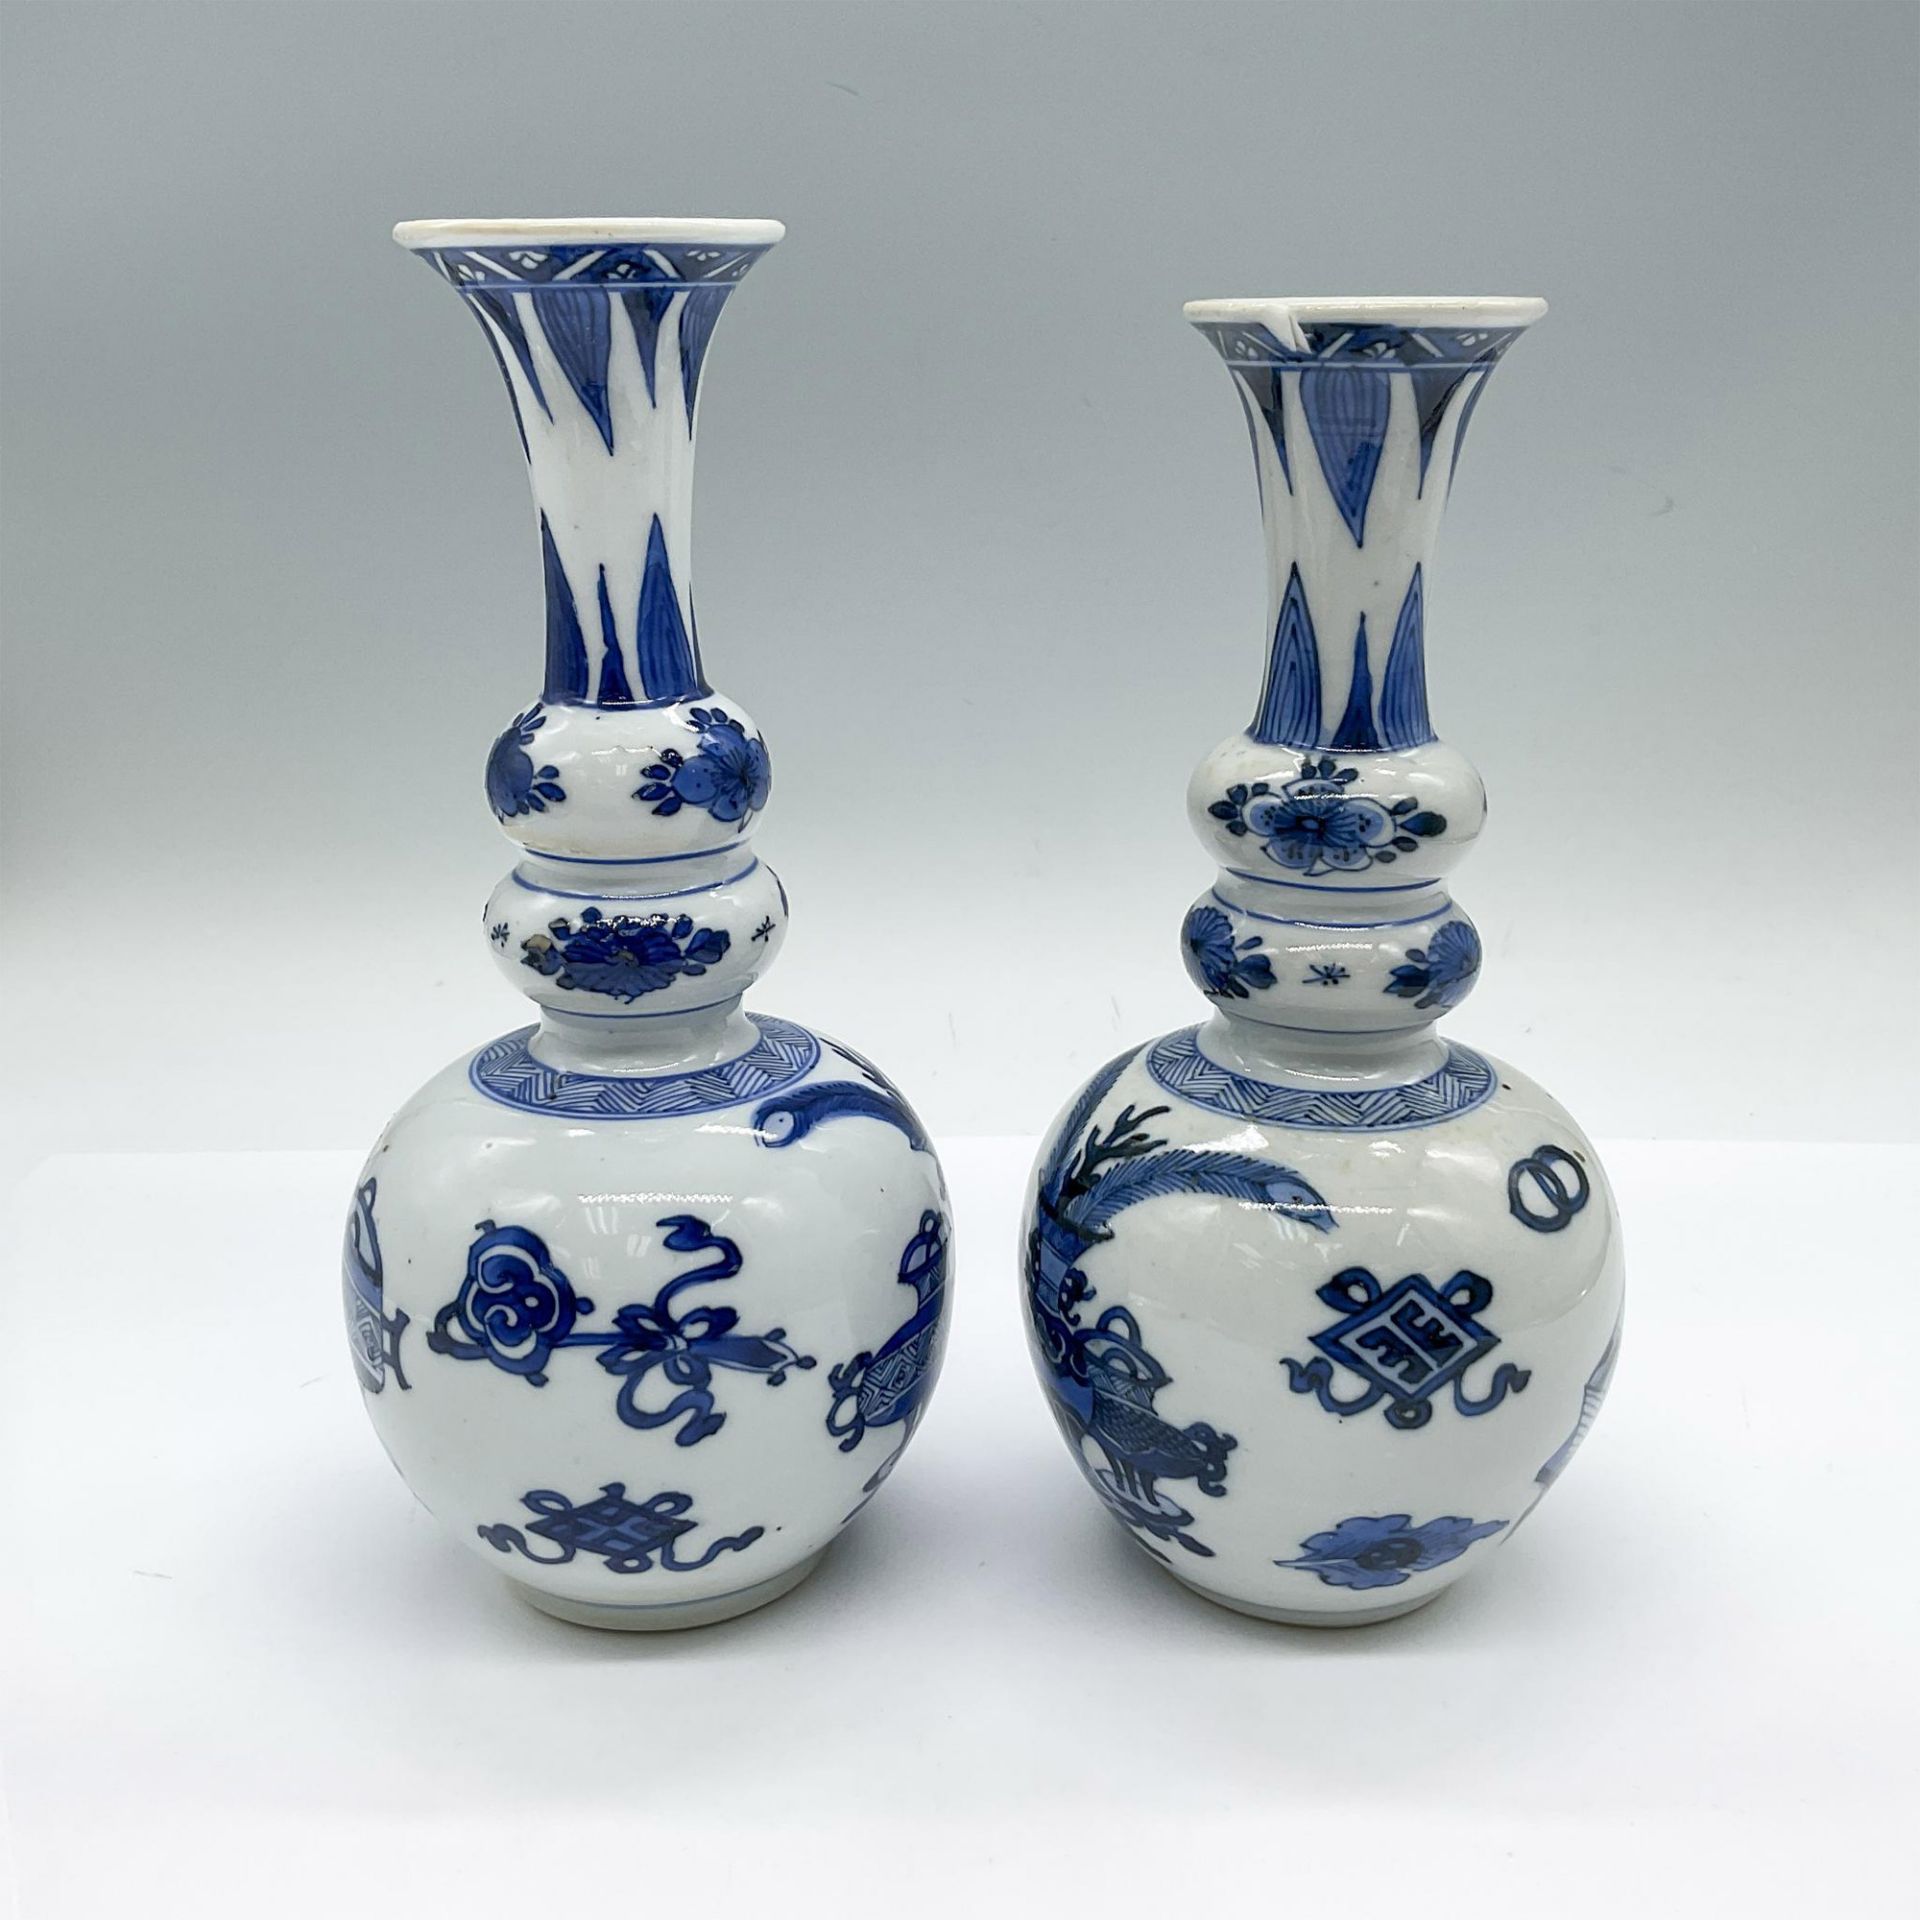 Pair of Chinese Blue and White Porcelain Vases - Image 2 of 5